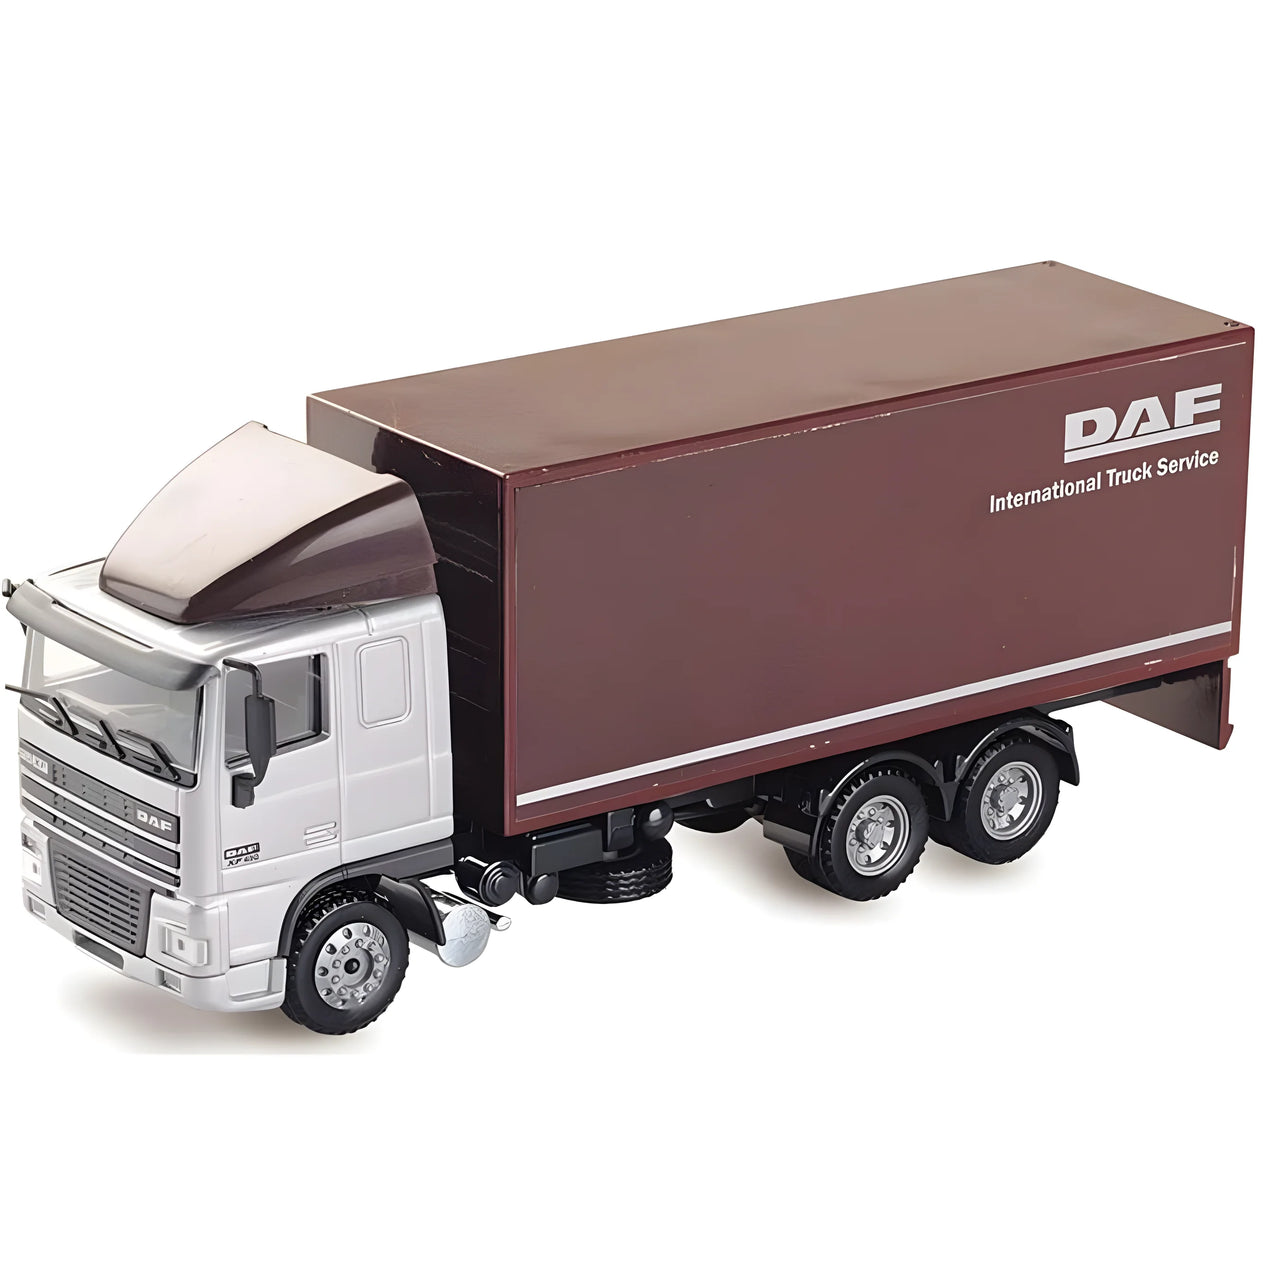 354 DAF 95XF Low Cabin Truck With Trailer Scale 1:50 (Discontinued Model)